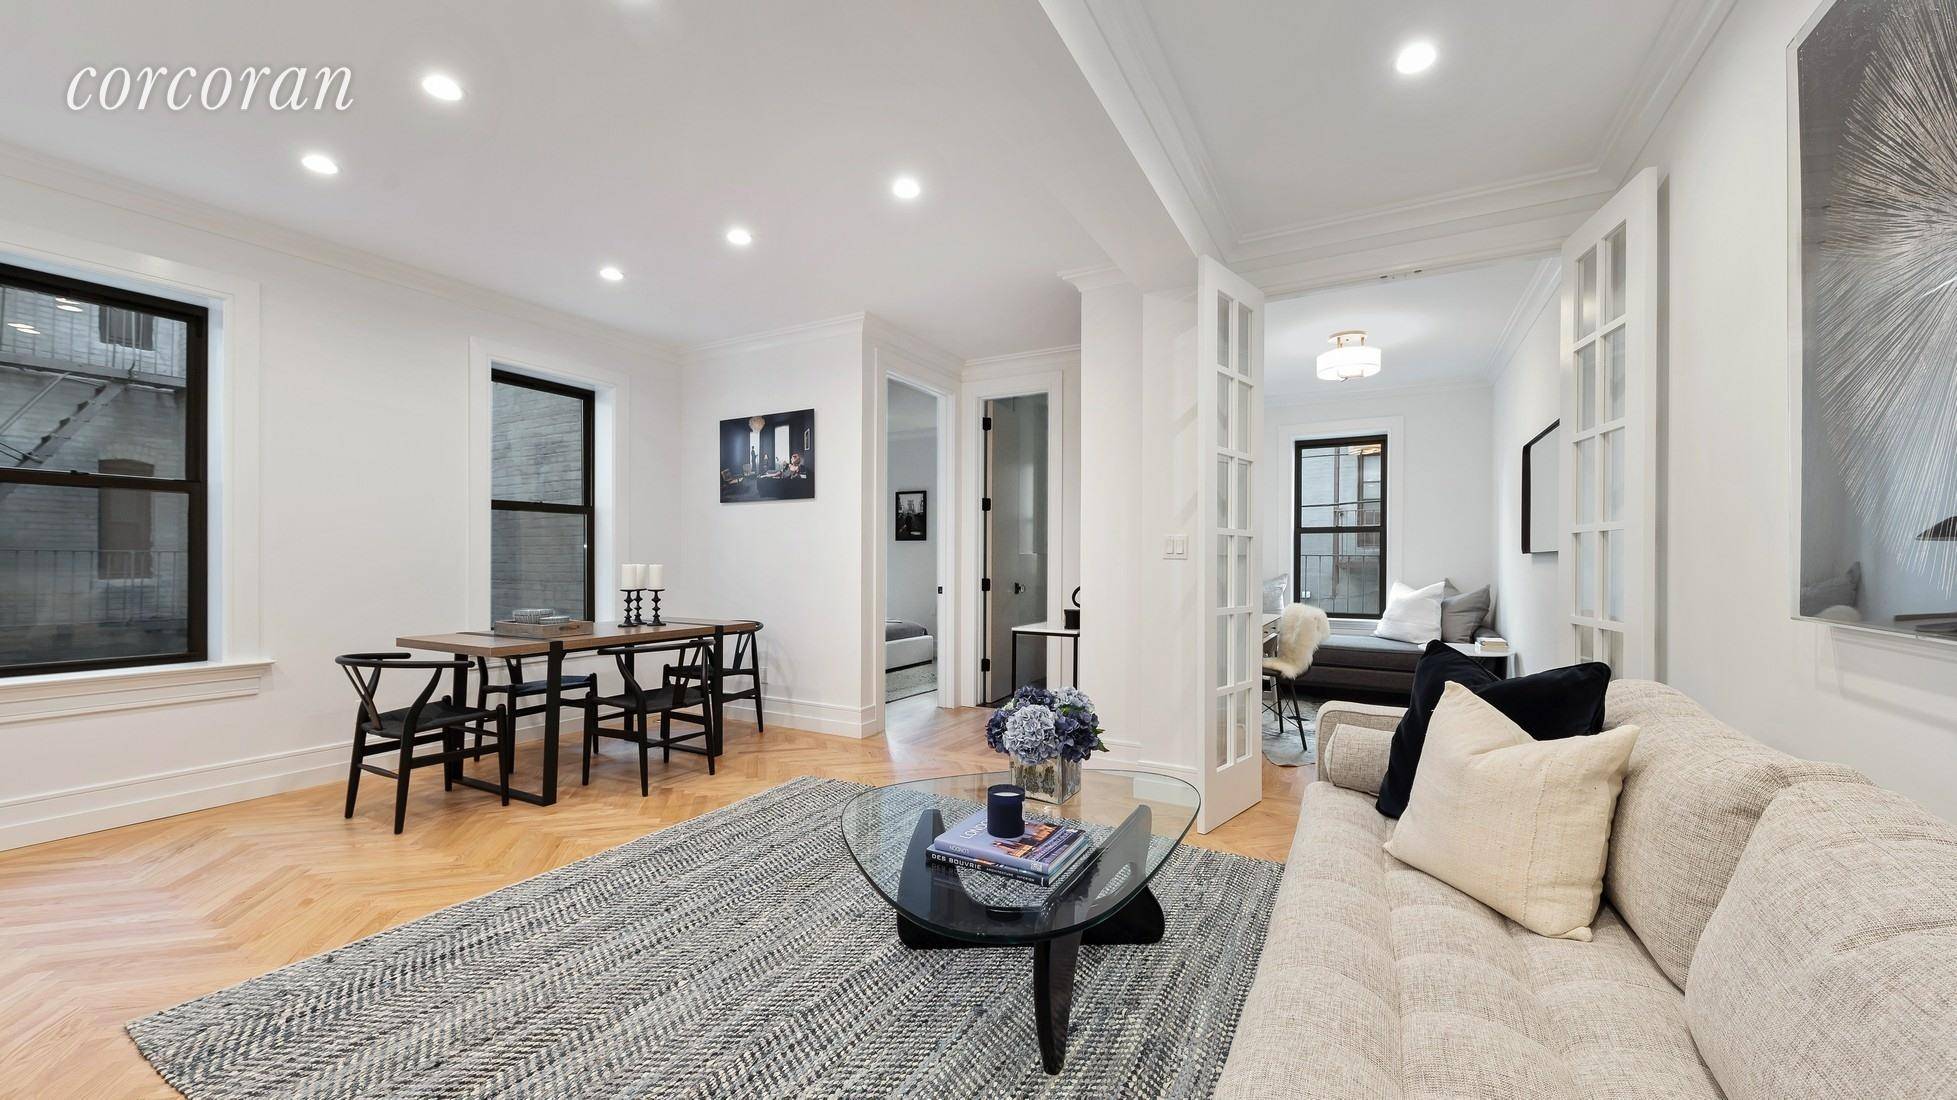 Presenting Astoria Lights A four completely renovated pre war co op buildings that have been reimagined and reinvigorated with open, loft style floor plans, cutting edge amenities and sophisticated modern ...